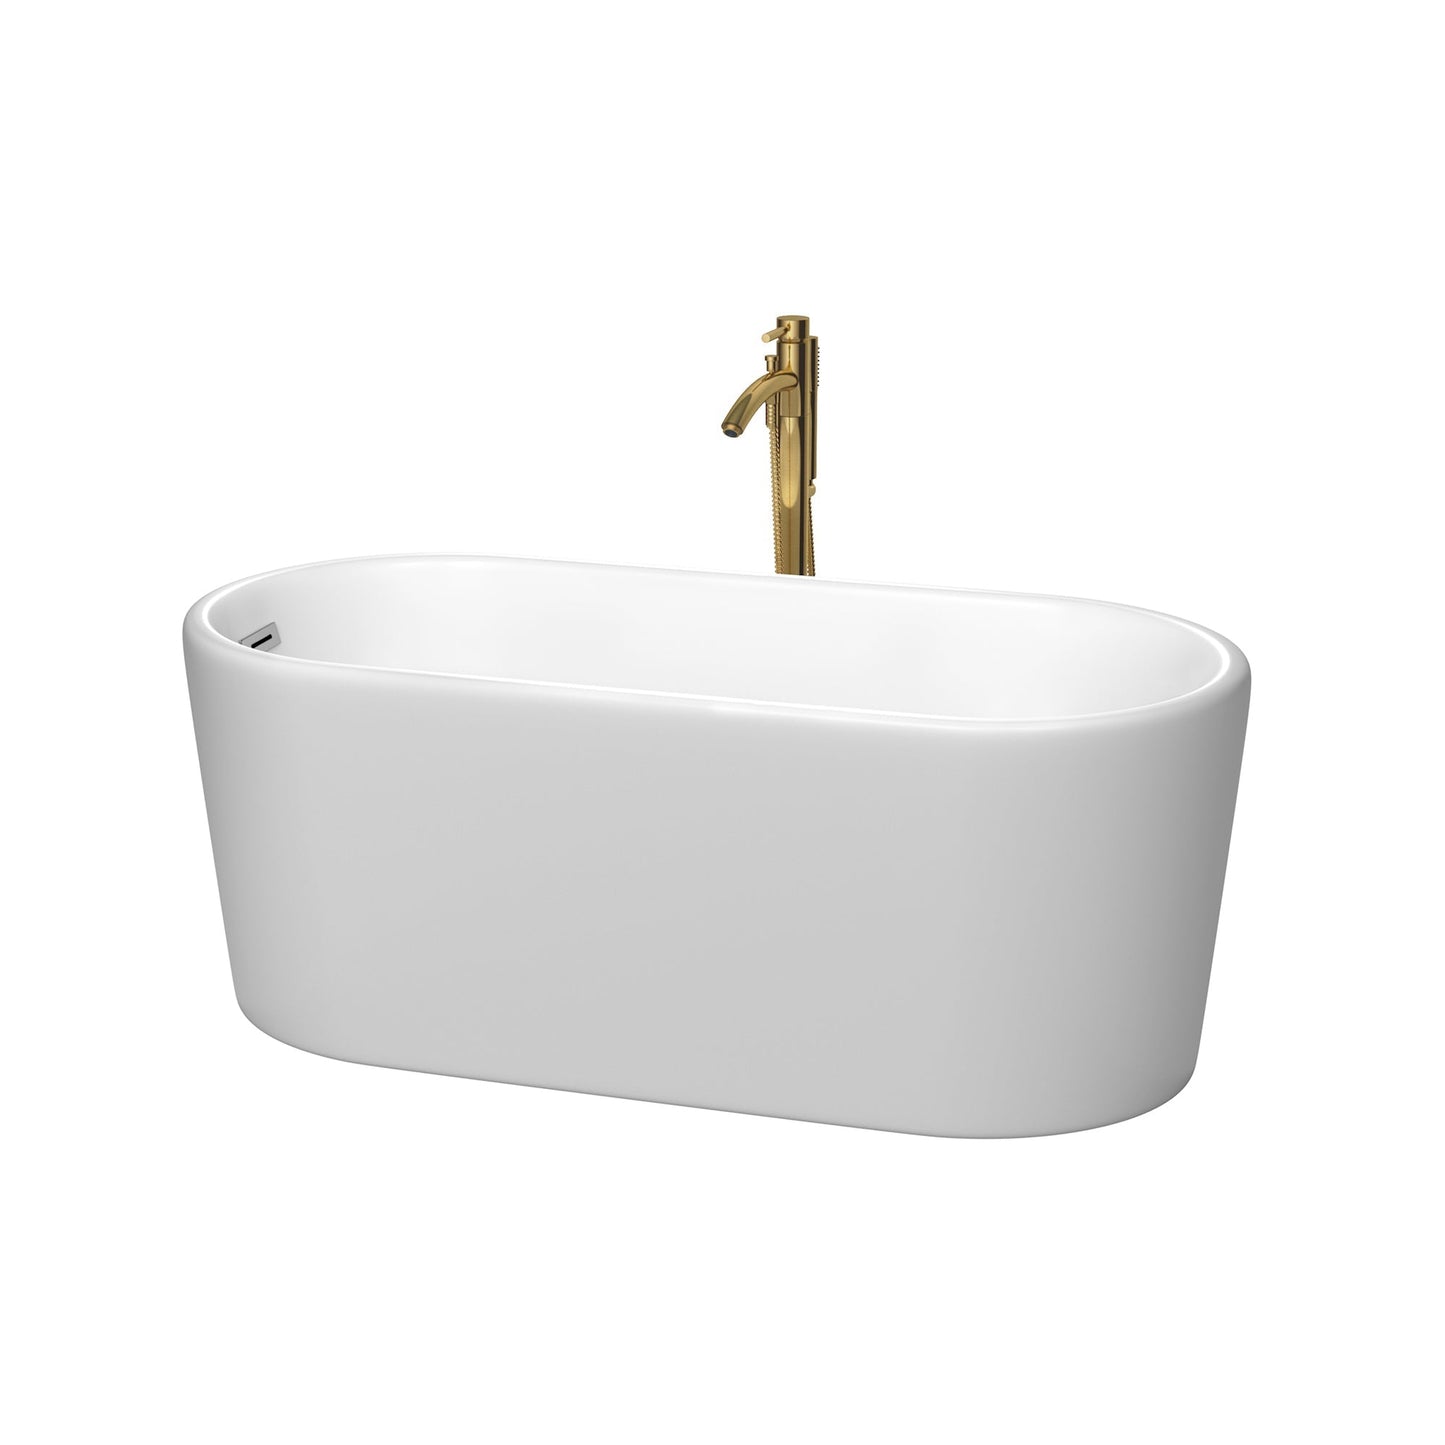 Wyndham Collection Ursula 59" Freestanding Bathtub in Matte White With Polished Chrome Trim and Floor Mounted Faucet in Brushed Gold